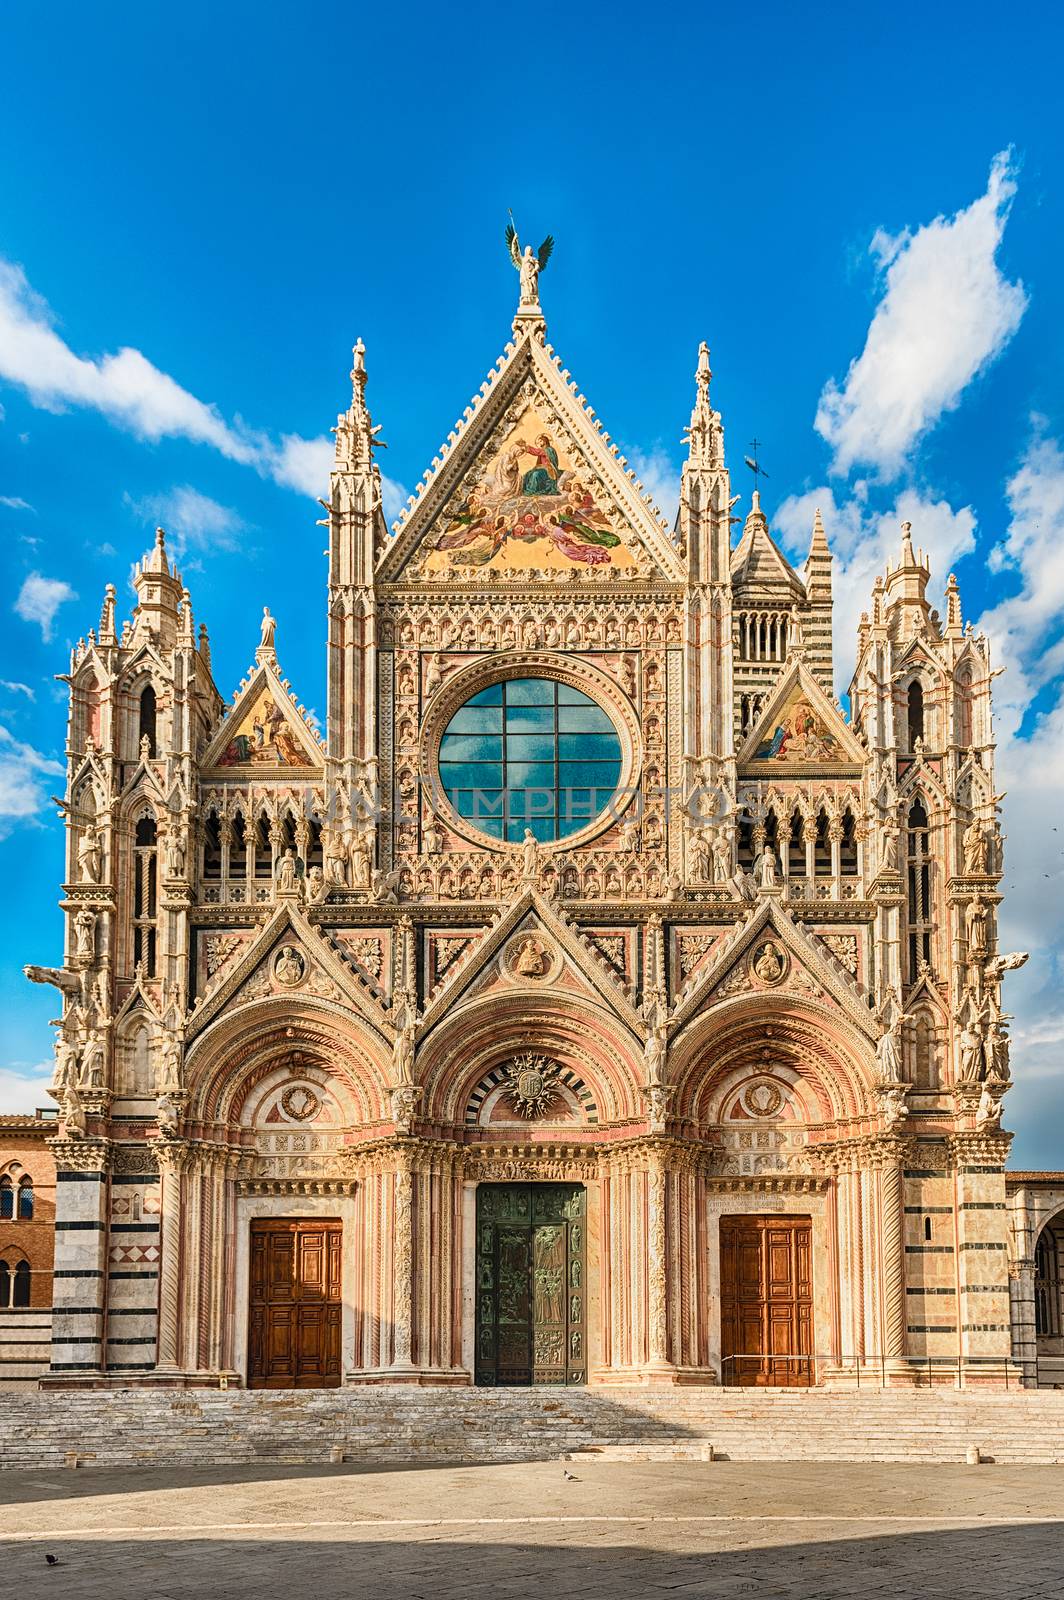 Facade of the gothic Cathedral of Siena, Tuscany, Italy by marcorubino